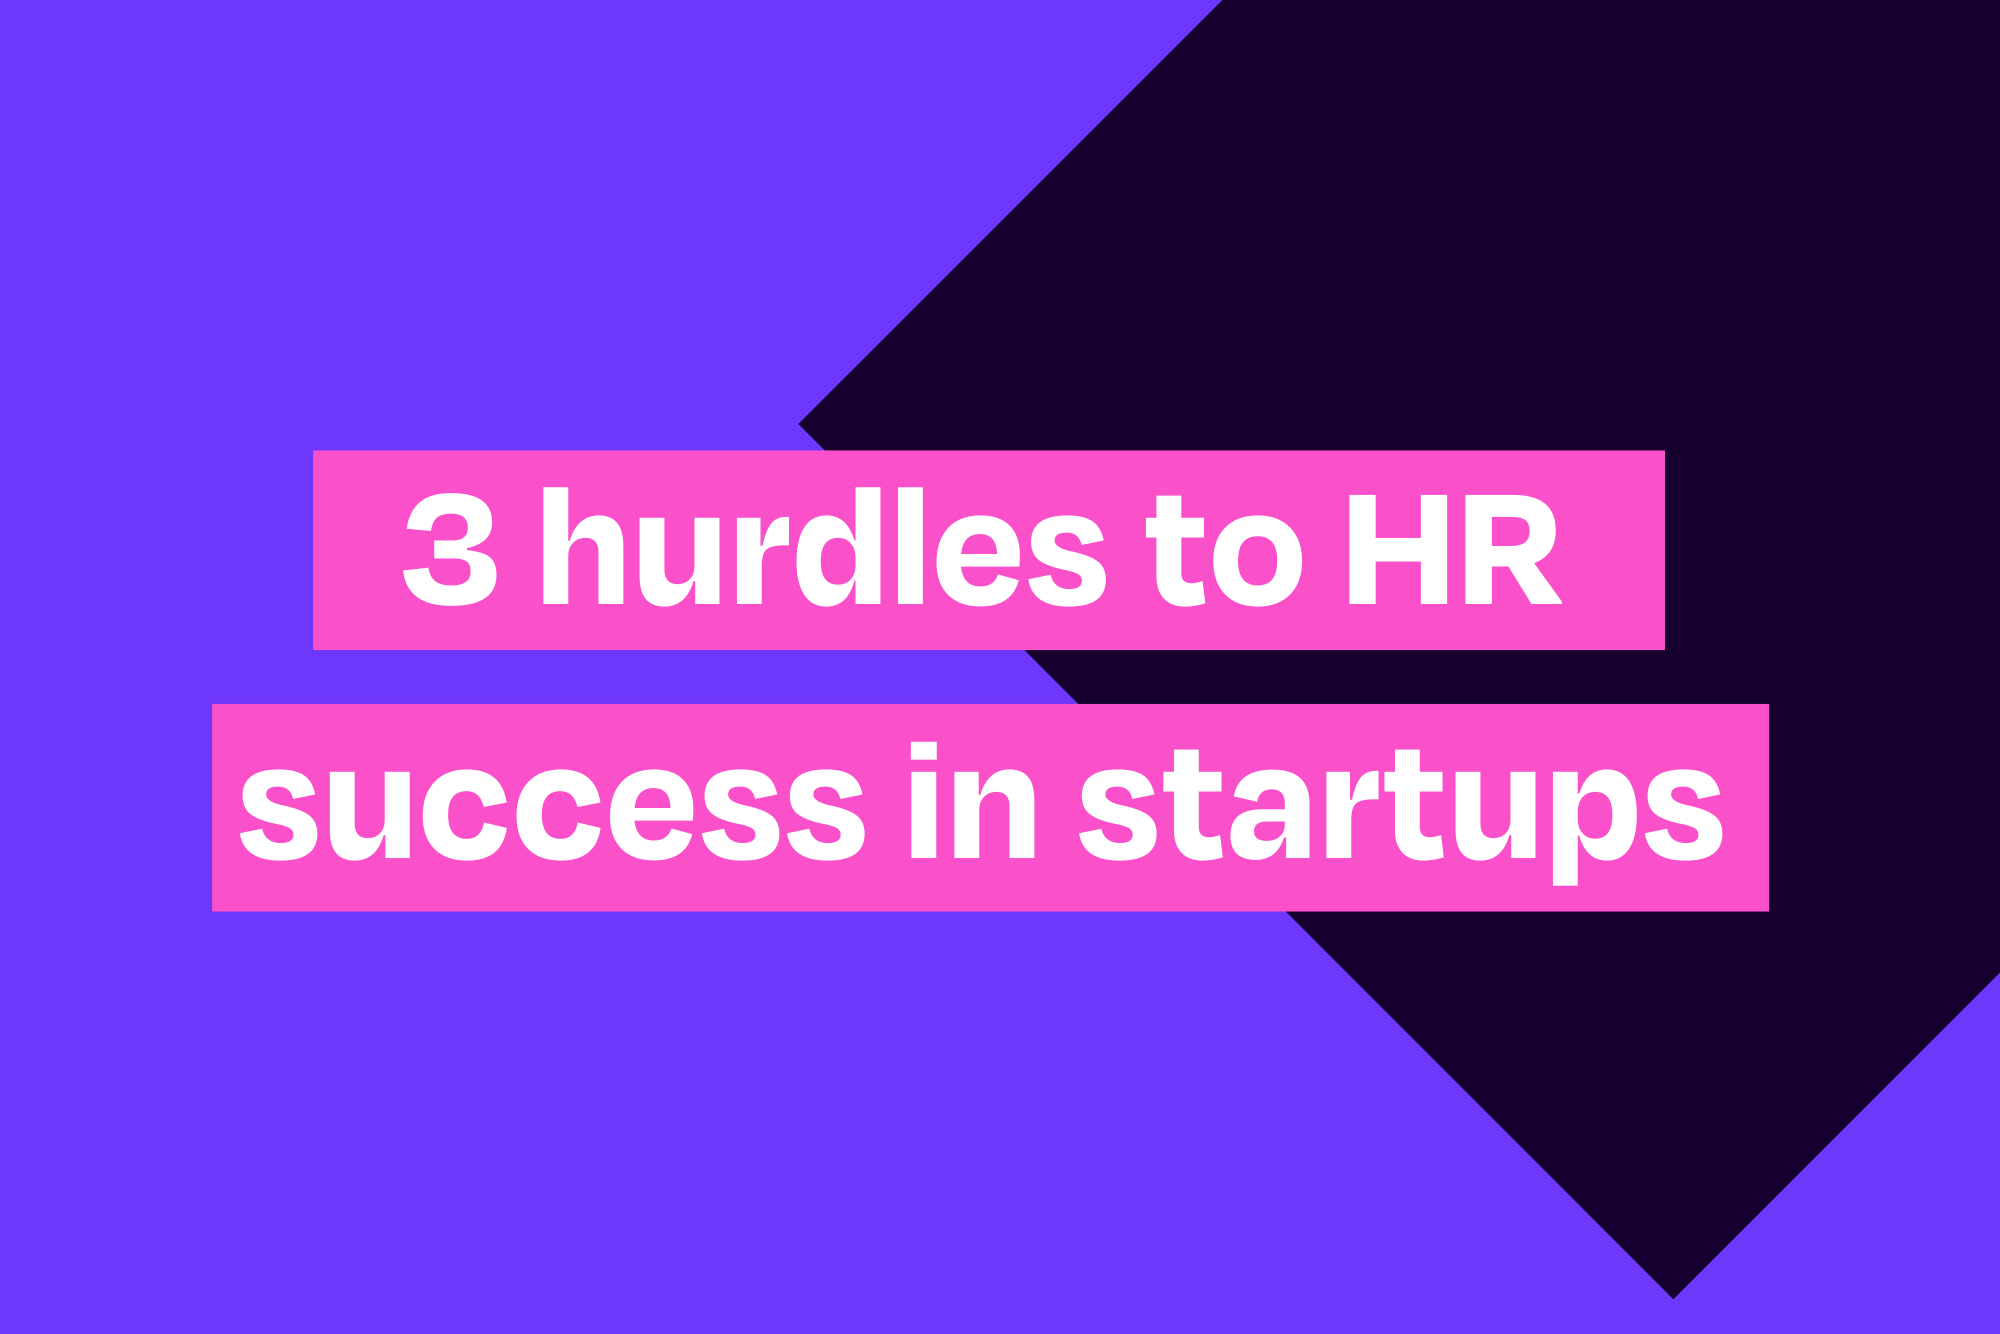 Decorative card with title of article "3 hurdles to HR success in startups"